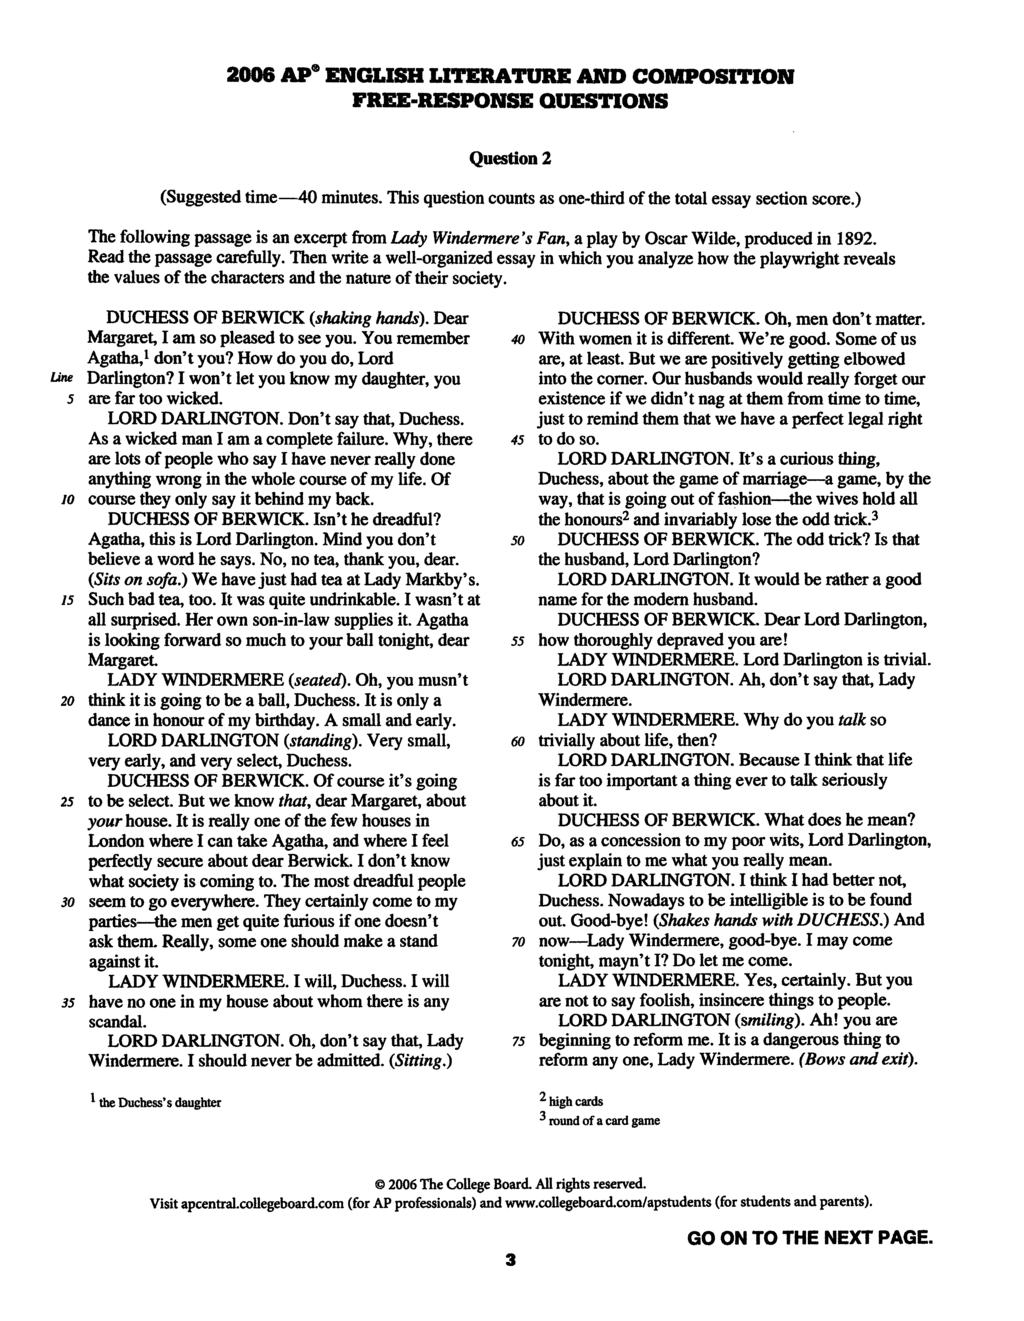 2006 AP ENGLISH LITERATURE AND COMPOSITION FREE-RESPONSE QUESTIONS 224 Question 2 (Suggested time 40 minutes.this questioncounts as one-thirdof the total essay section score.